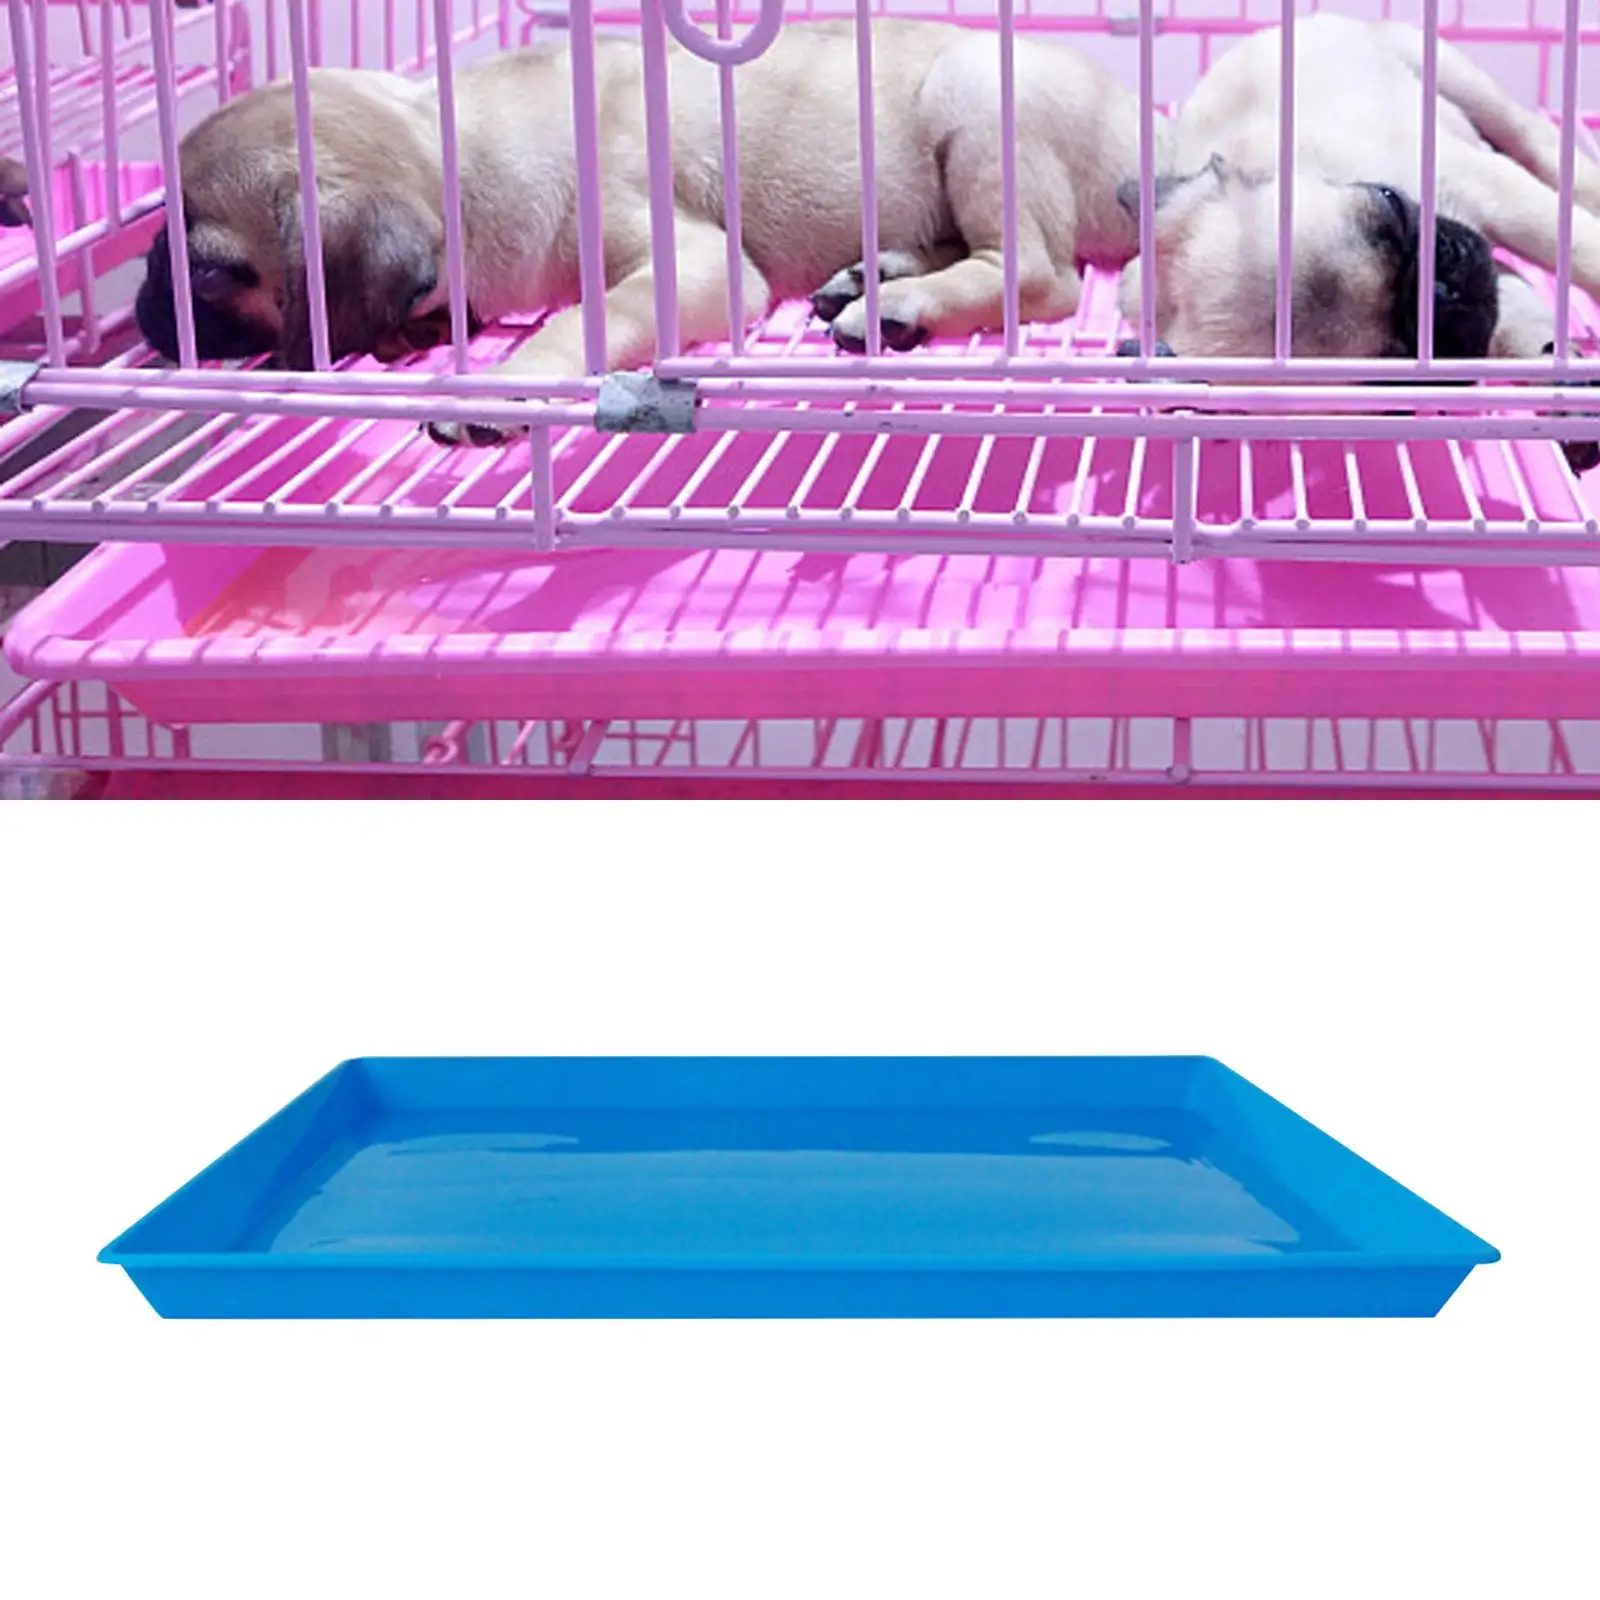 Large Dog Cage Tray Puppy Potty Tray Toilet Urinal Cleaning Tool Bedpan for Pet Supplies Dogs Cats Puppy Ferret Home Balcony